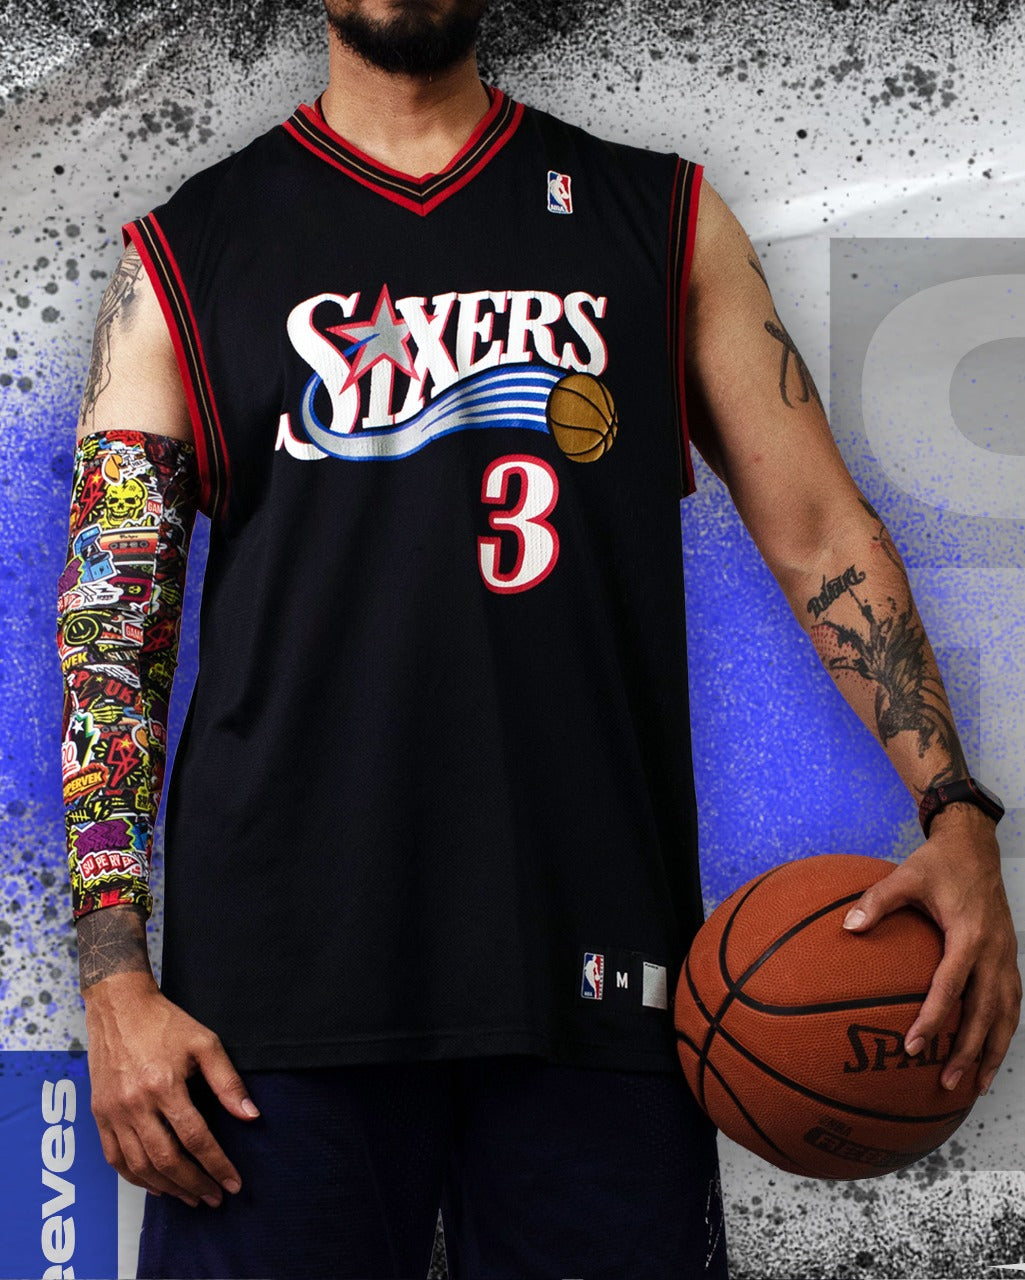 Why do NBA Players Wear Shooting Sleeves?